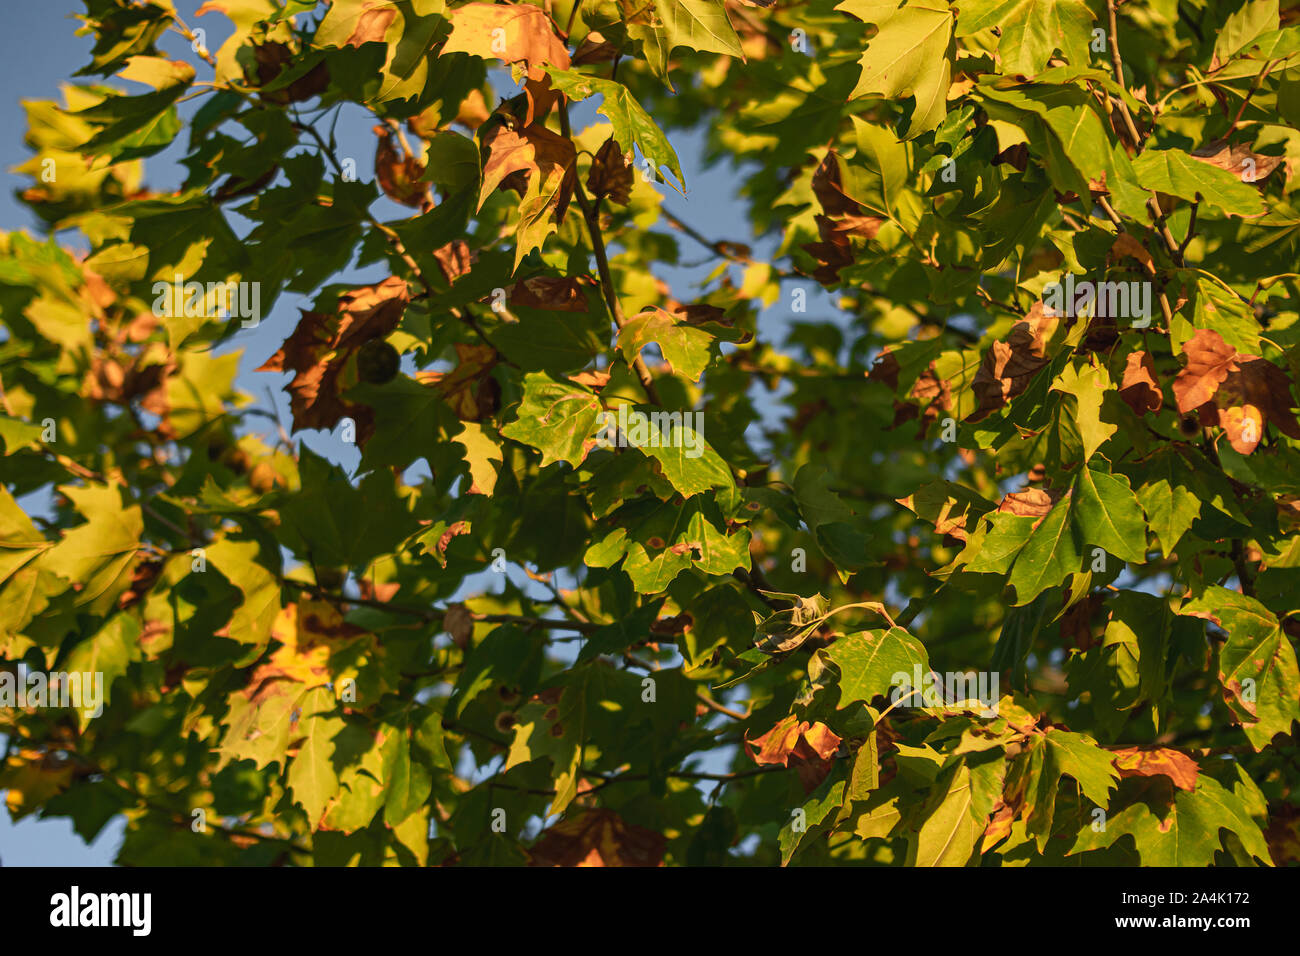 Foliage of a tree about to transform its colors towards ocher and brown tones with the change of season towards autumn Stock Photo